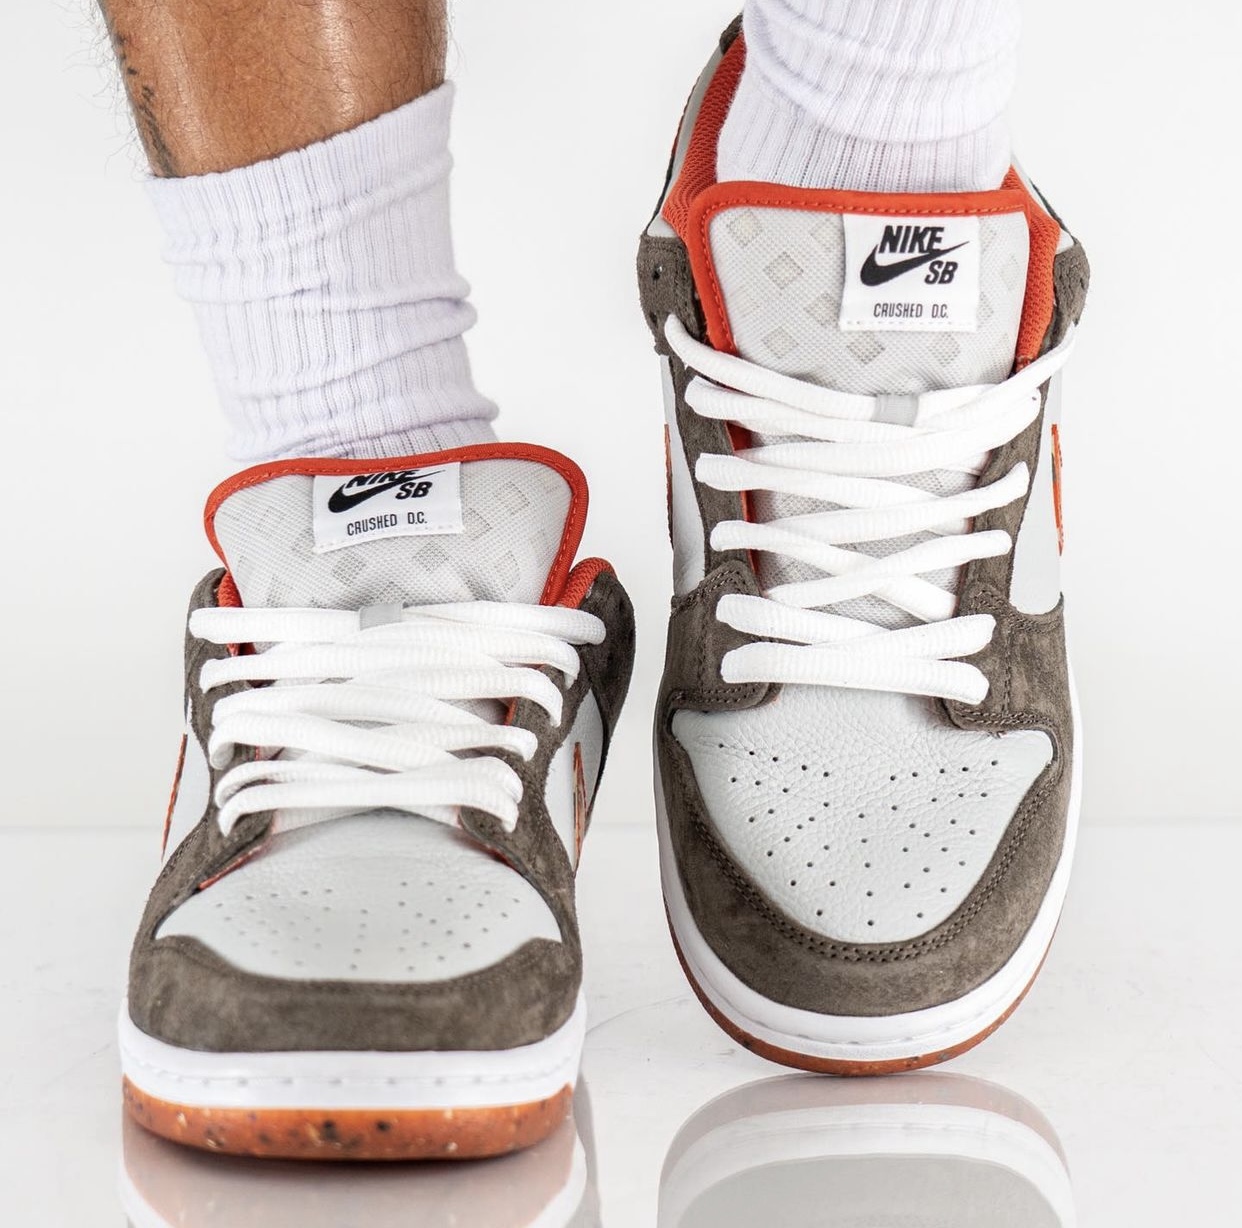 Crushed DC plant Nike SB Dunk Low DH7782 001 Release Date On Feet 5